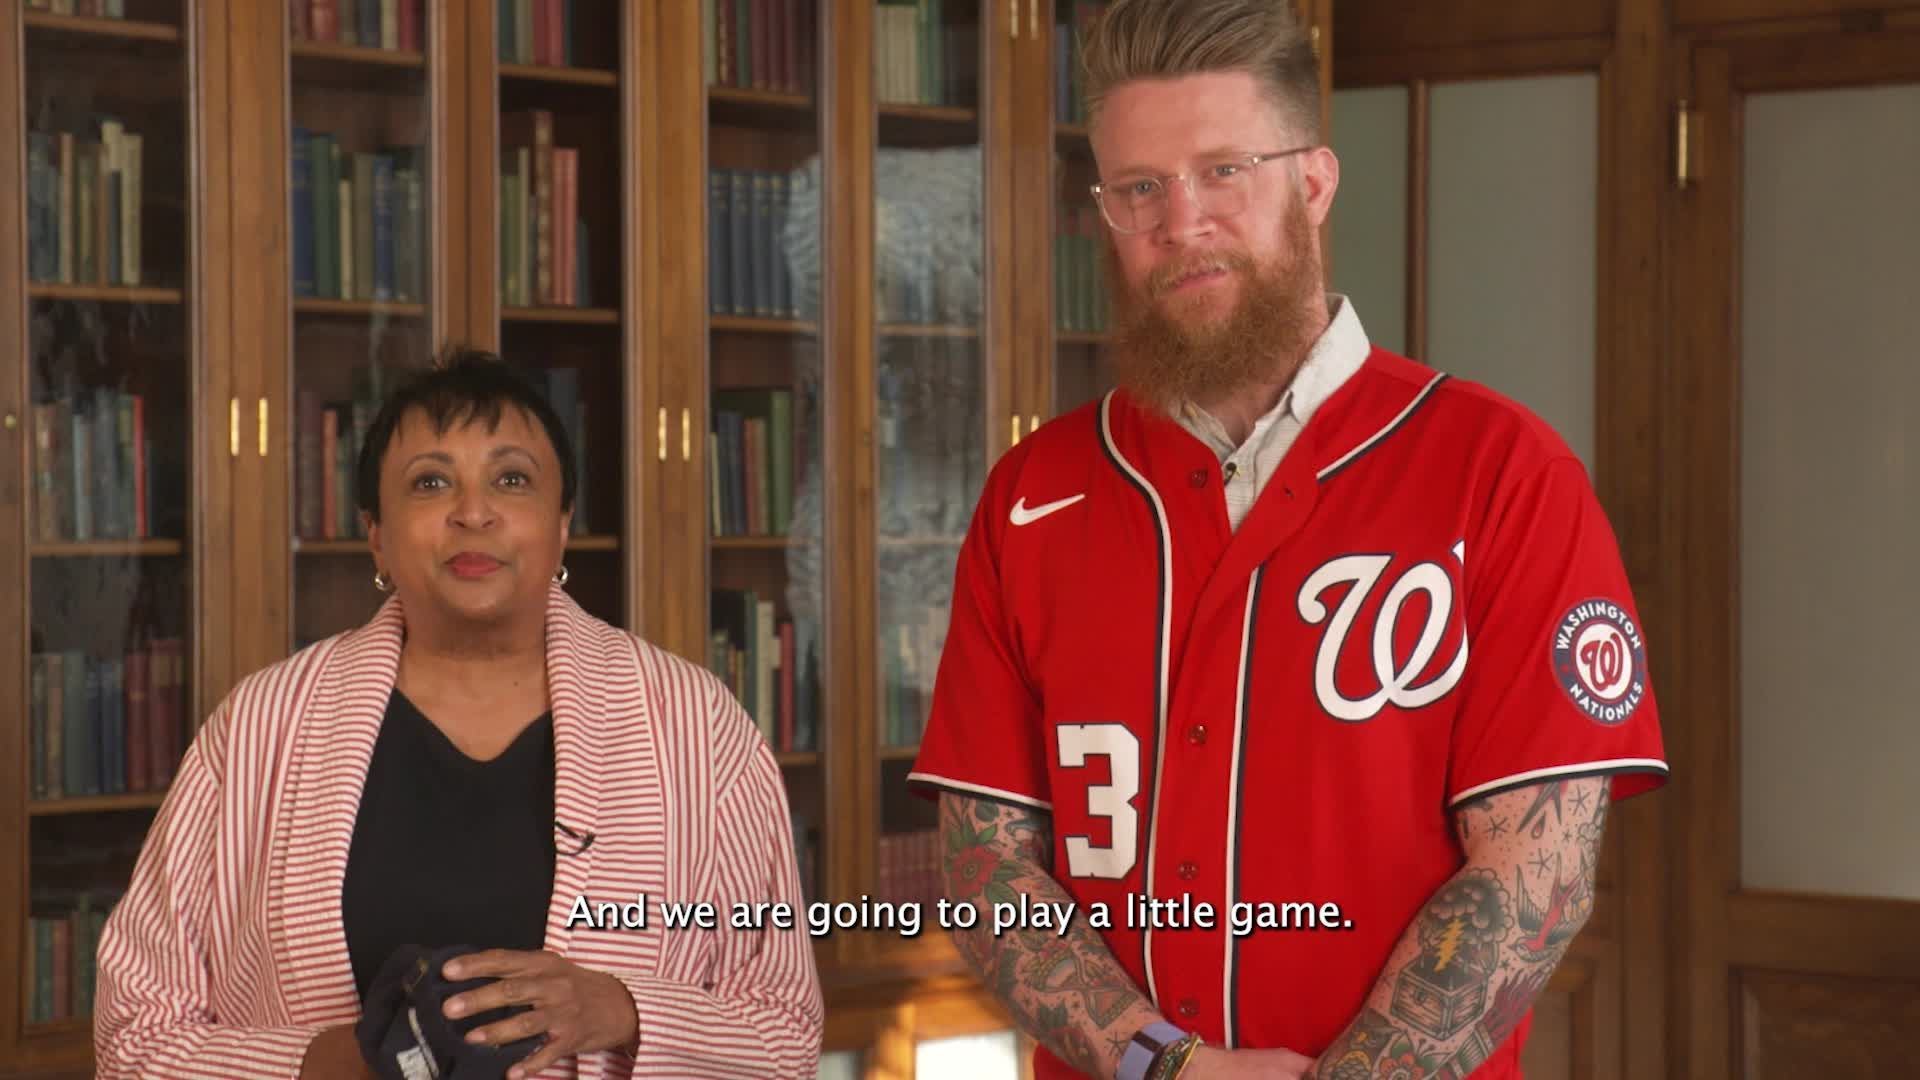 Join the ‘Team That Reads’ for Library of Congress Night at Nationals Park on Aug. 30